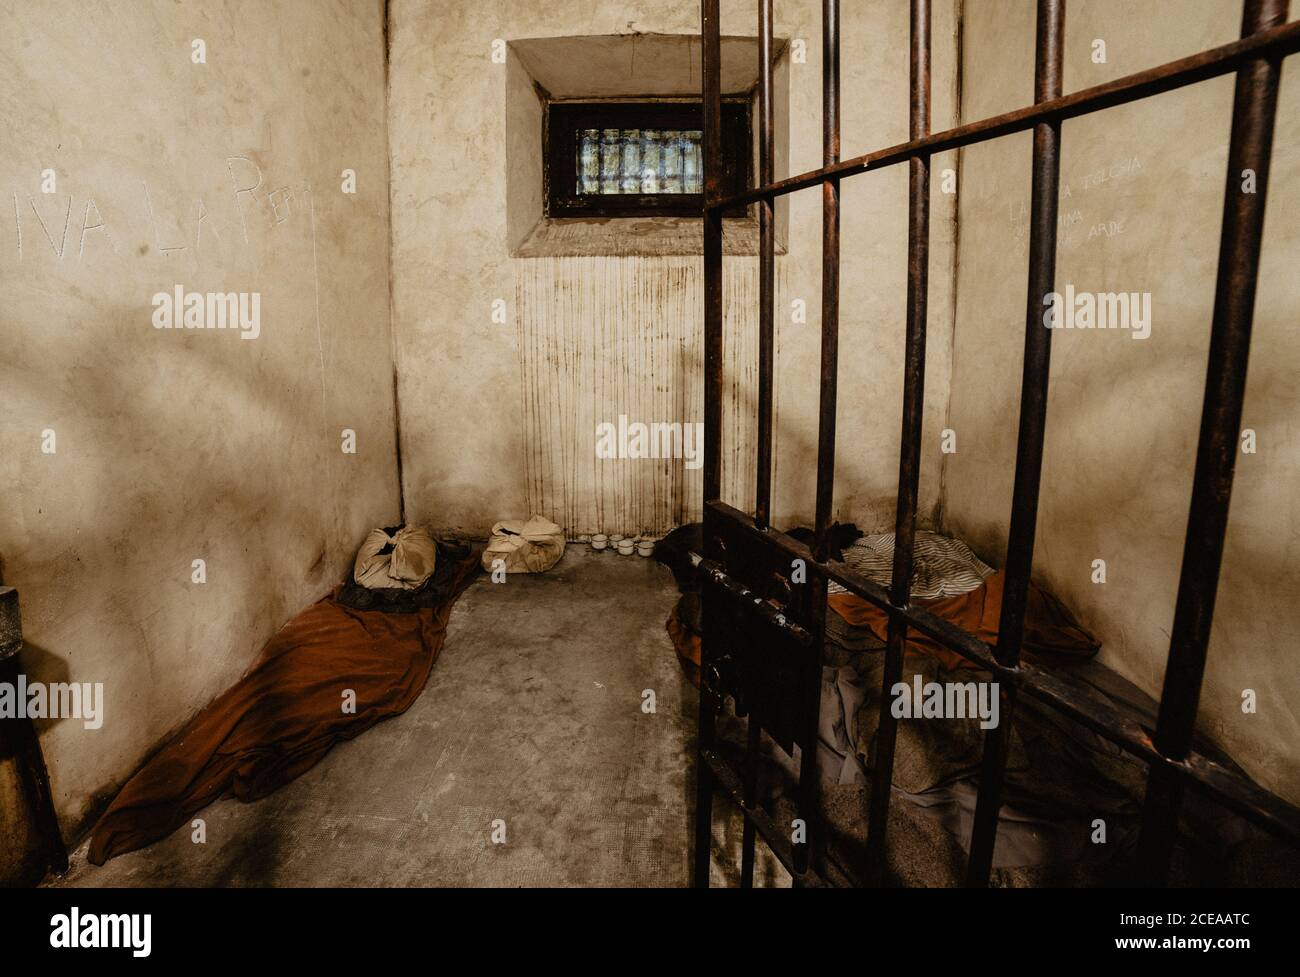 Grungy concrete wall inside prison cell in Oviedo, Spain Stock Photo